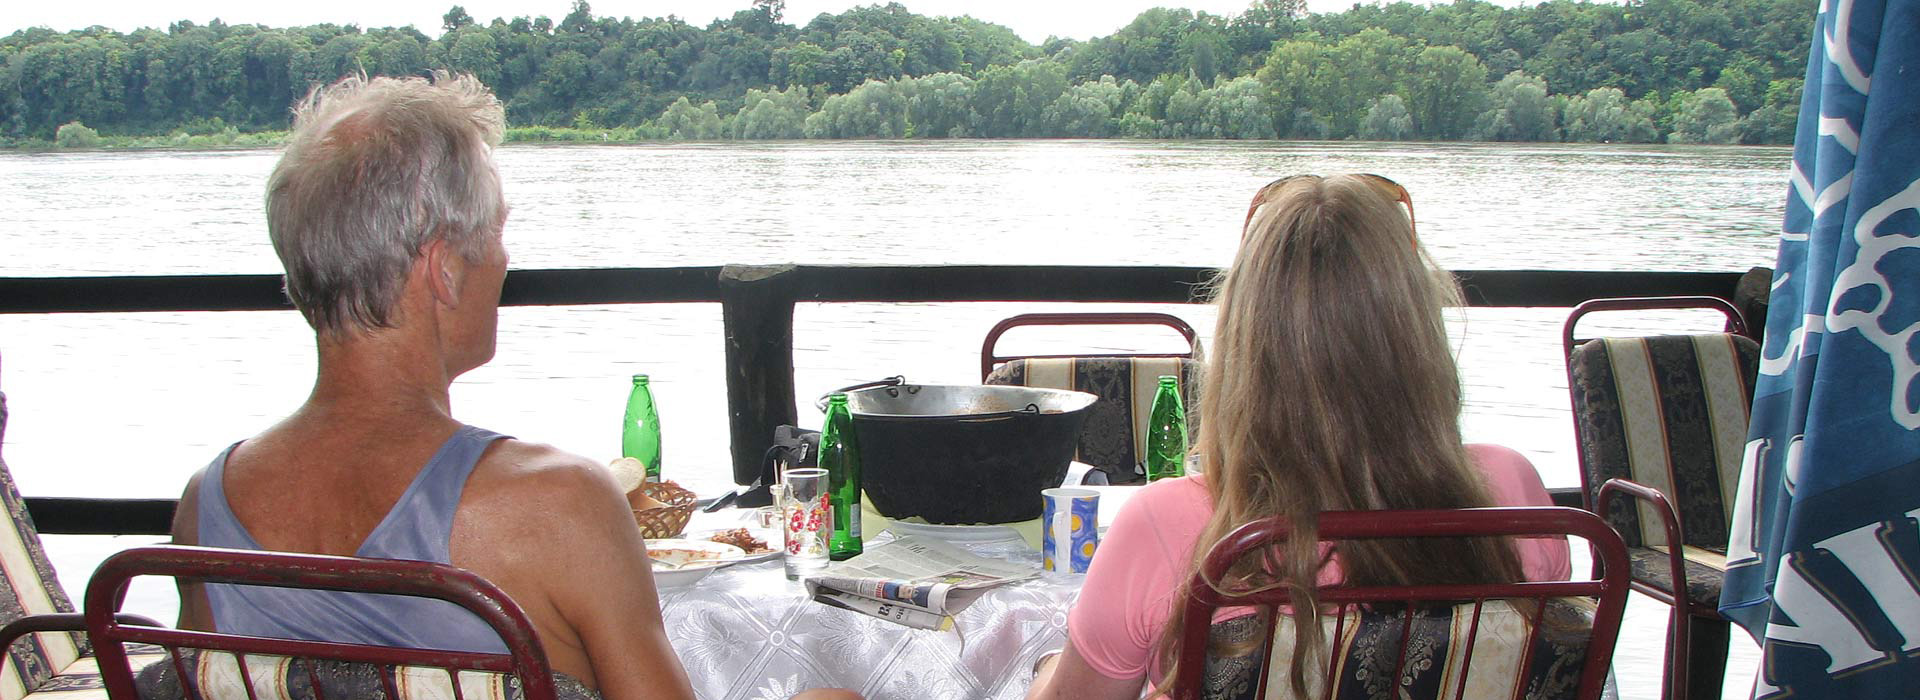 Danube Guided Cycling Holiday - Restaurants by the river